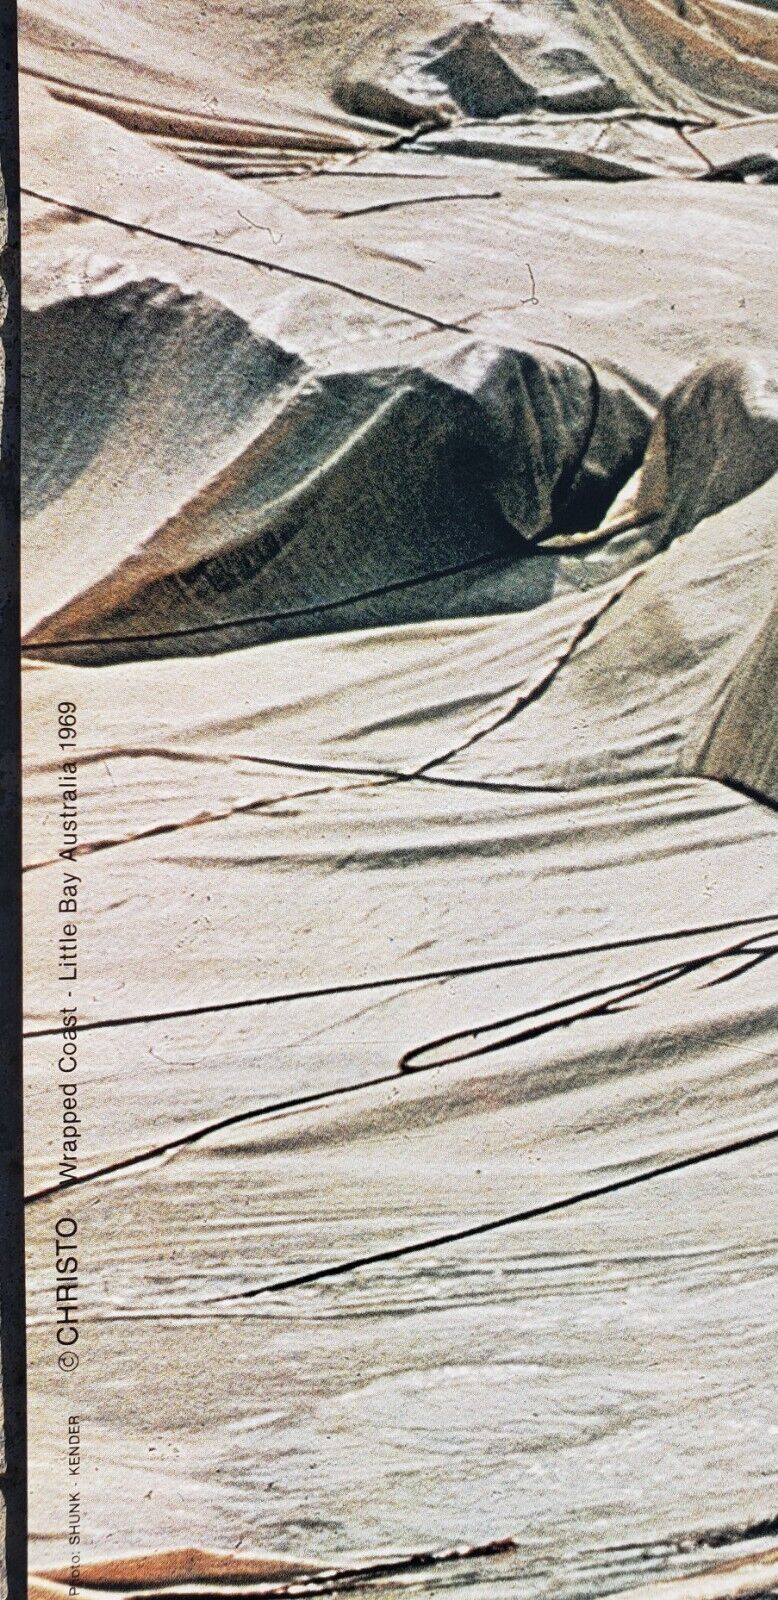 Christo and Jeanne-Claude Wrapped Coast - Little Bay Australia 1969